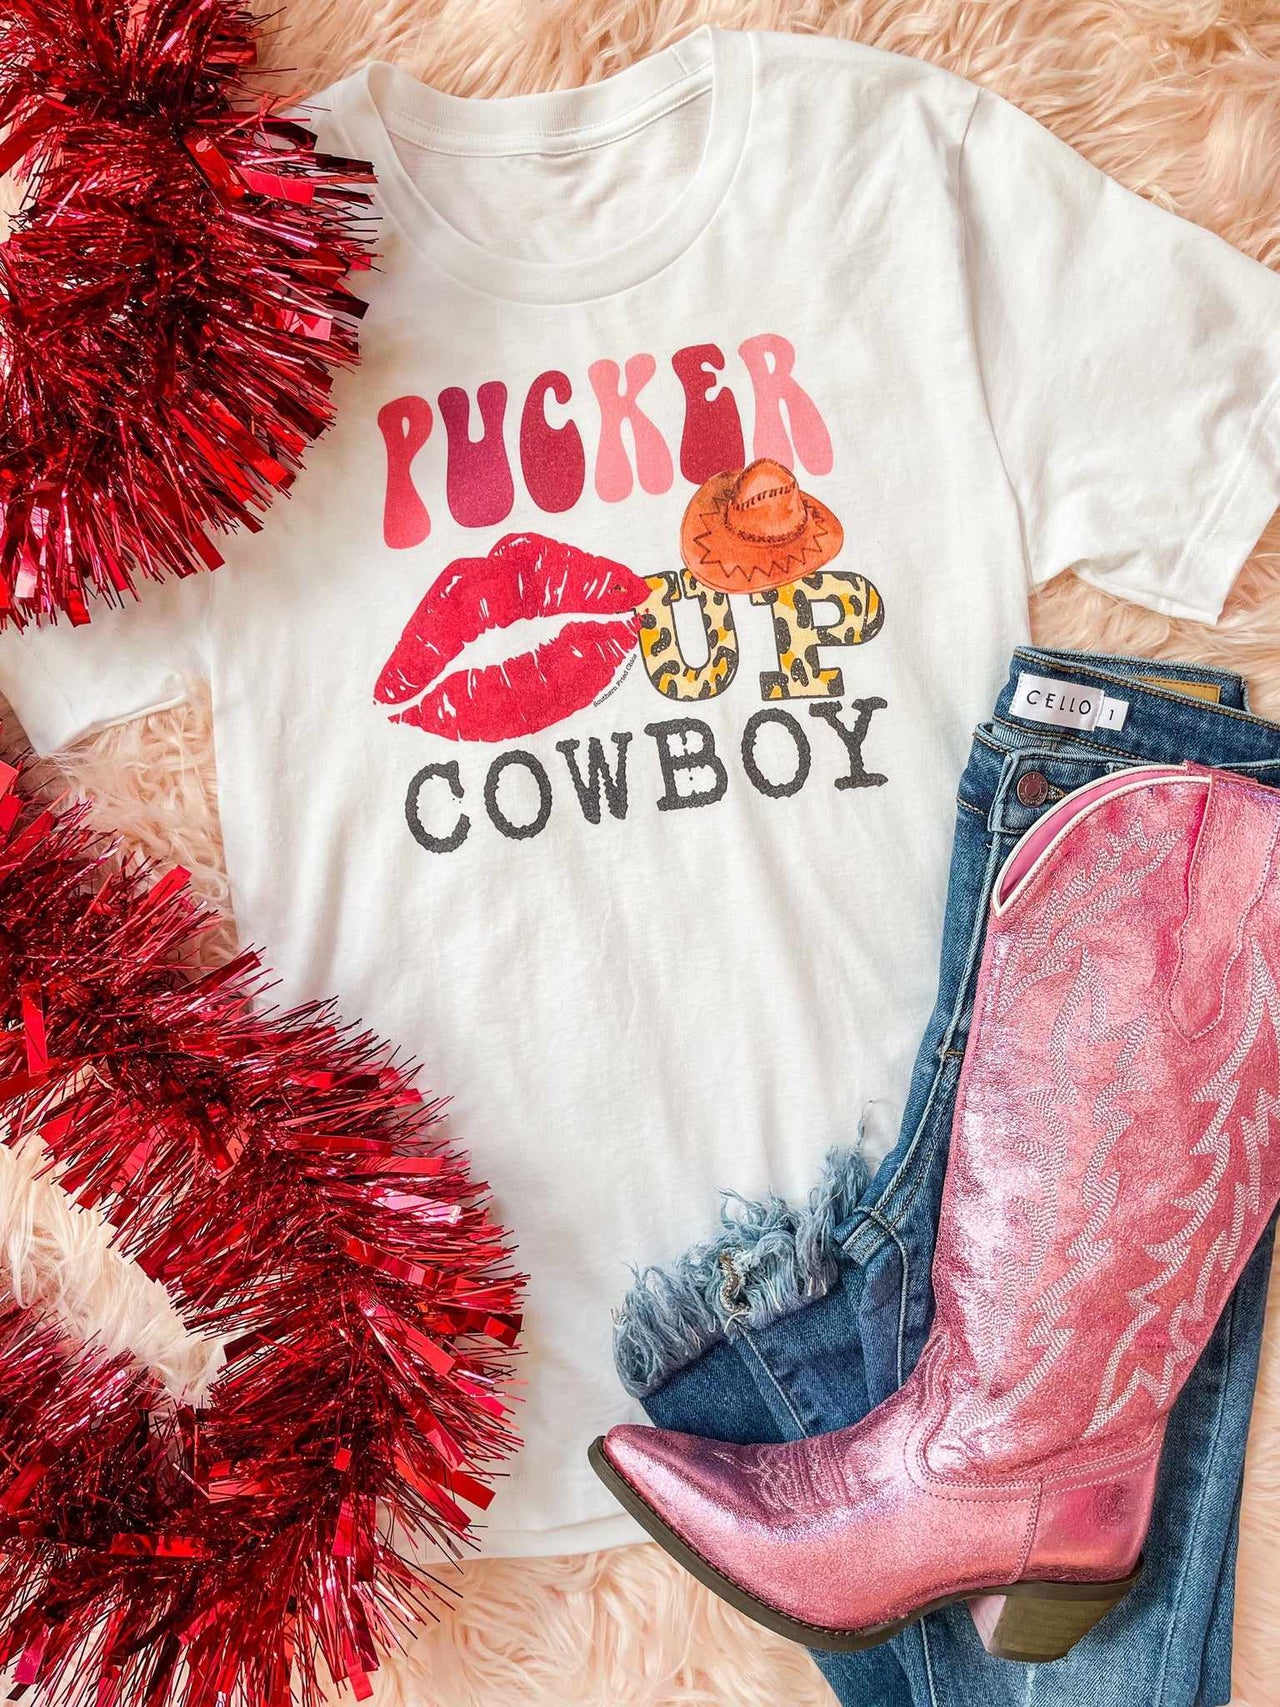 Pucker Up Cowboy Tee-Southern Fried Chics